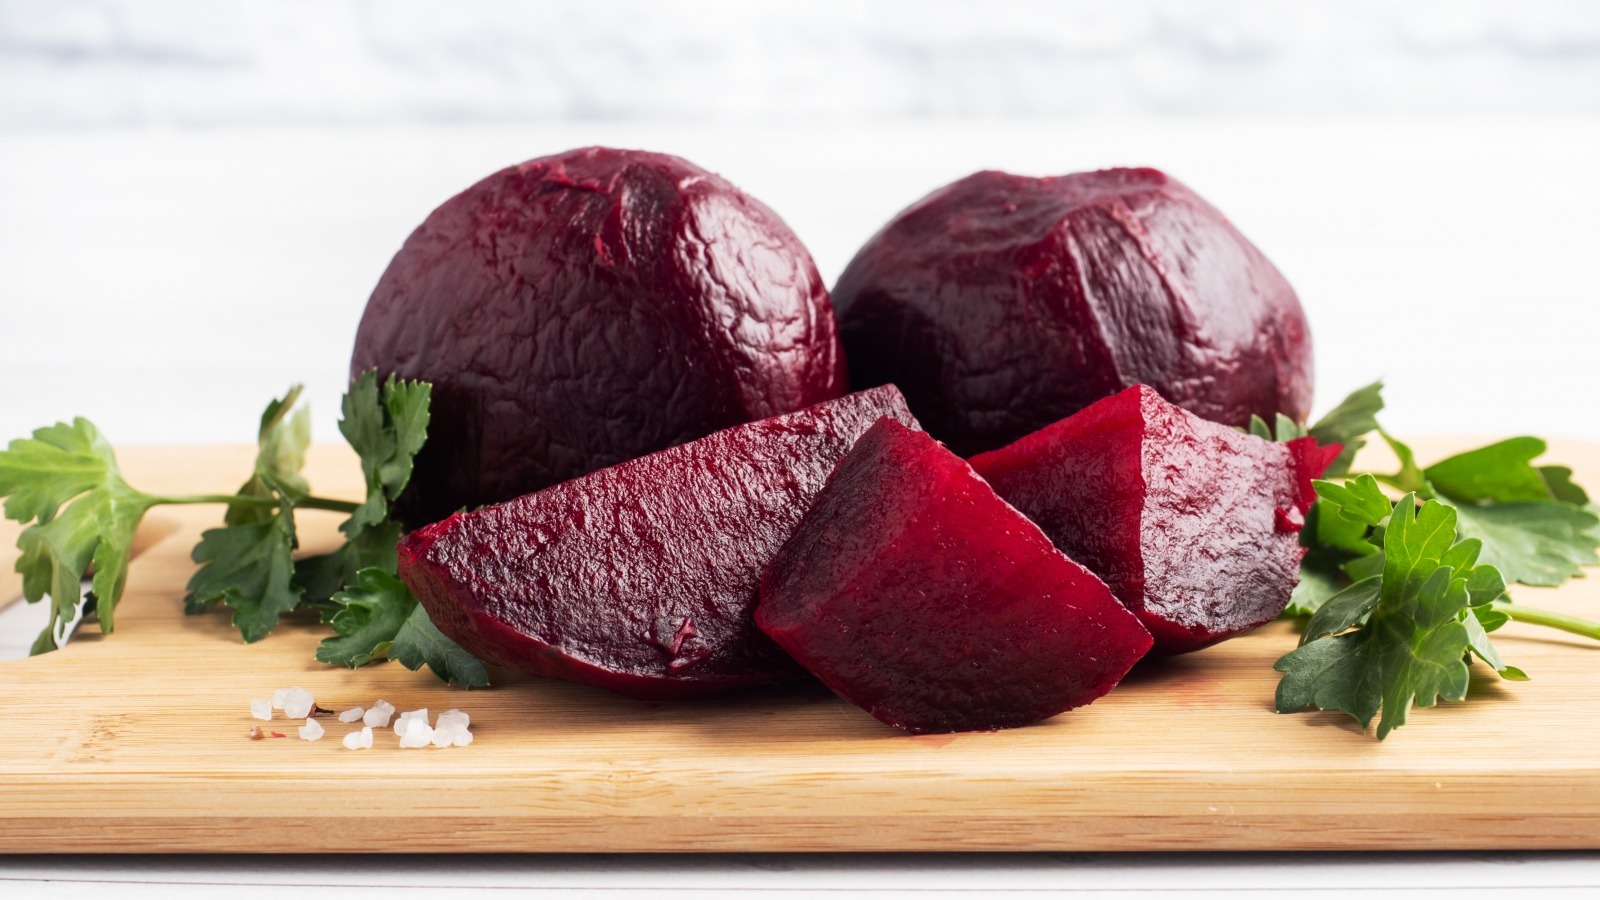 https://www.tastingtable.com/img/gallery/17-ways-to-add-more-flavor-to-beets/l-intro-1678977374.jpg